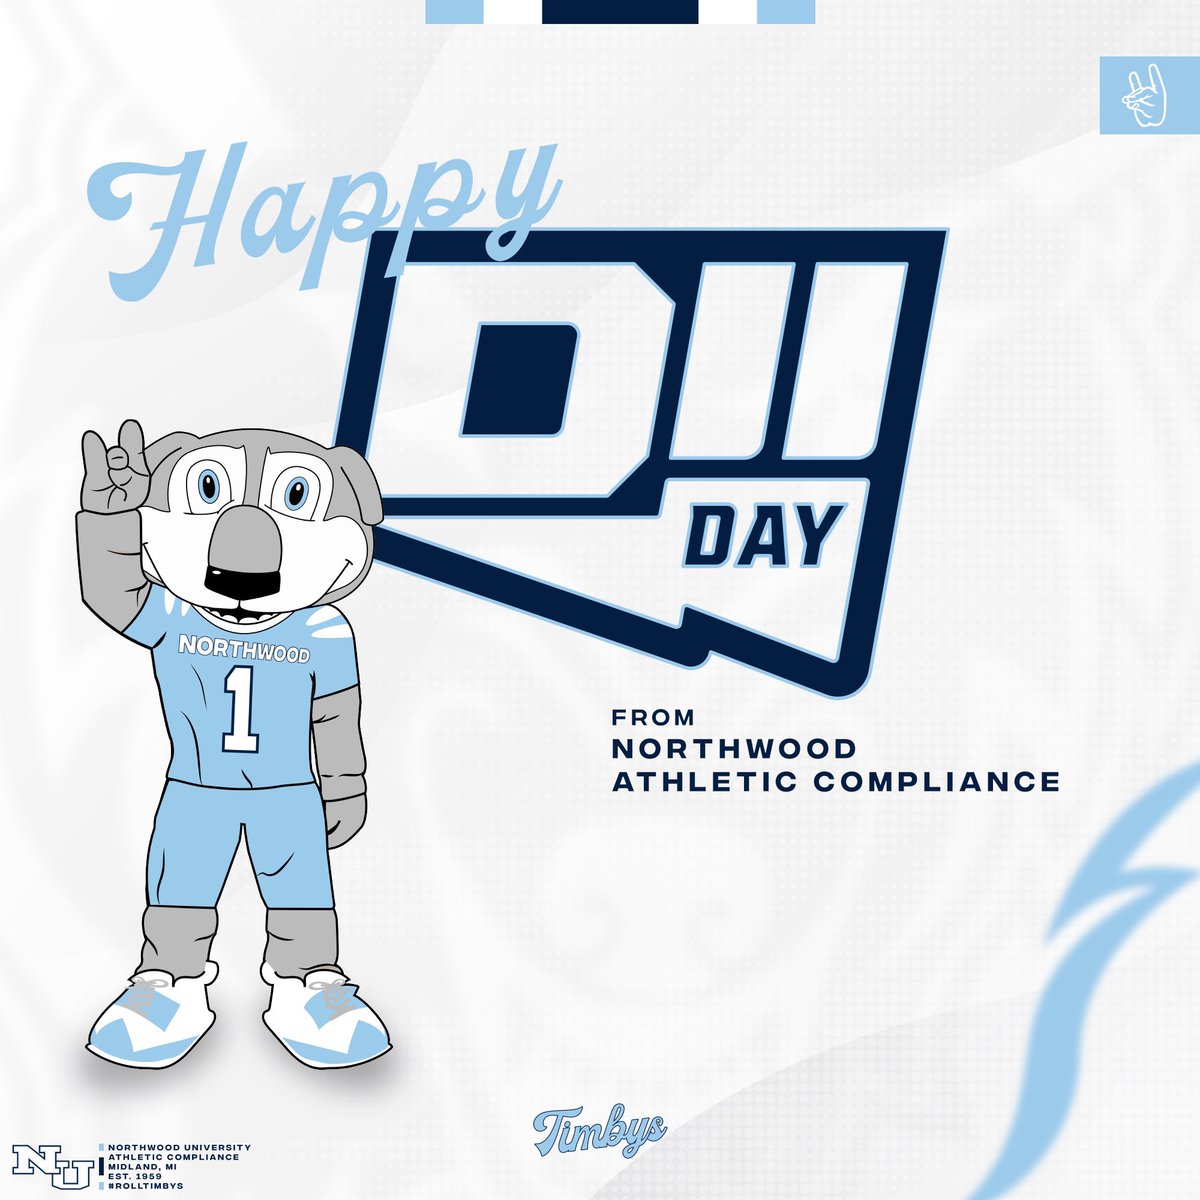 Happy DII Day!!!
From Northwood Athletic Compliance

#RollTimbys